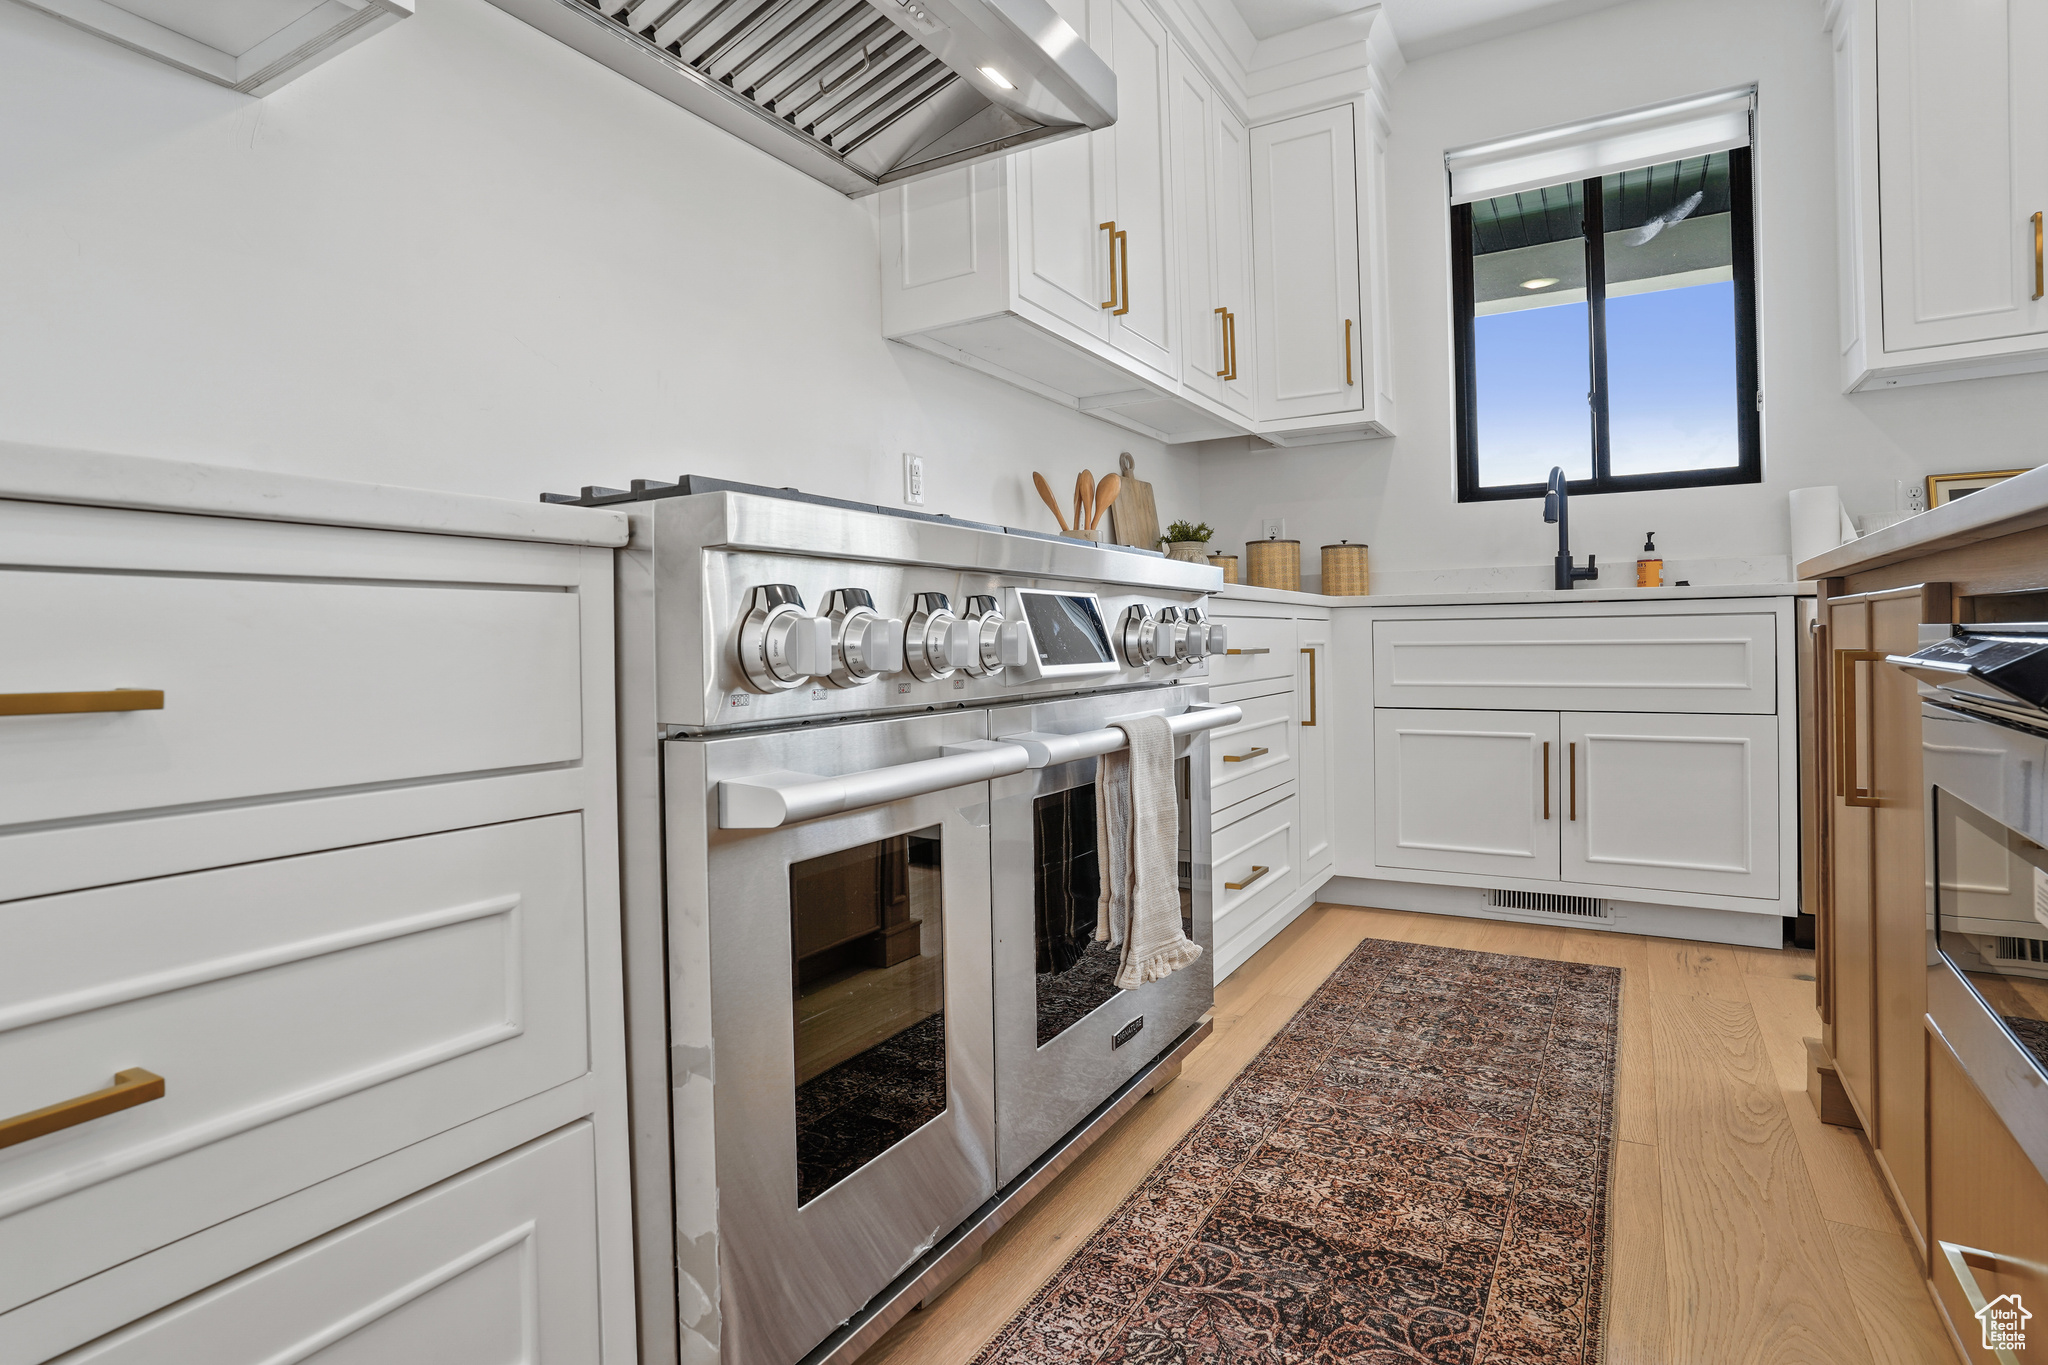 Kitchen featuring custom range hood, white cabinetry, light wood-type flooring, sink, and double oven range